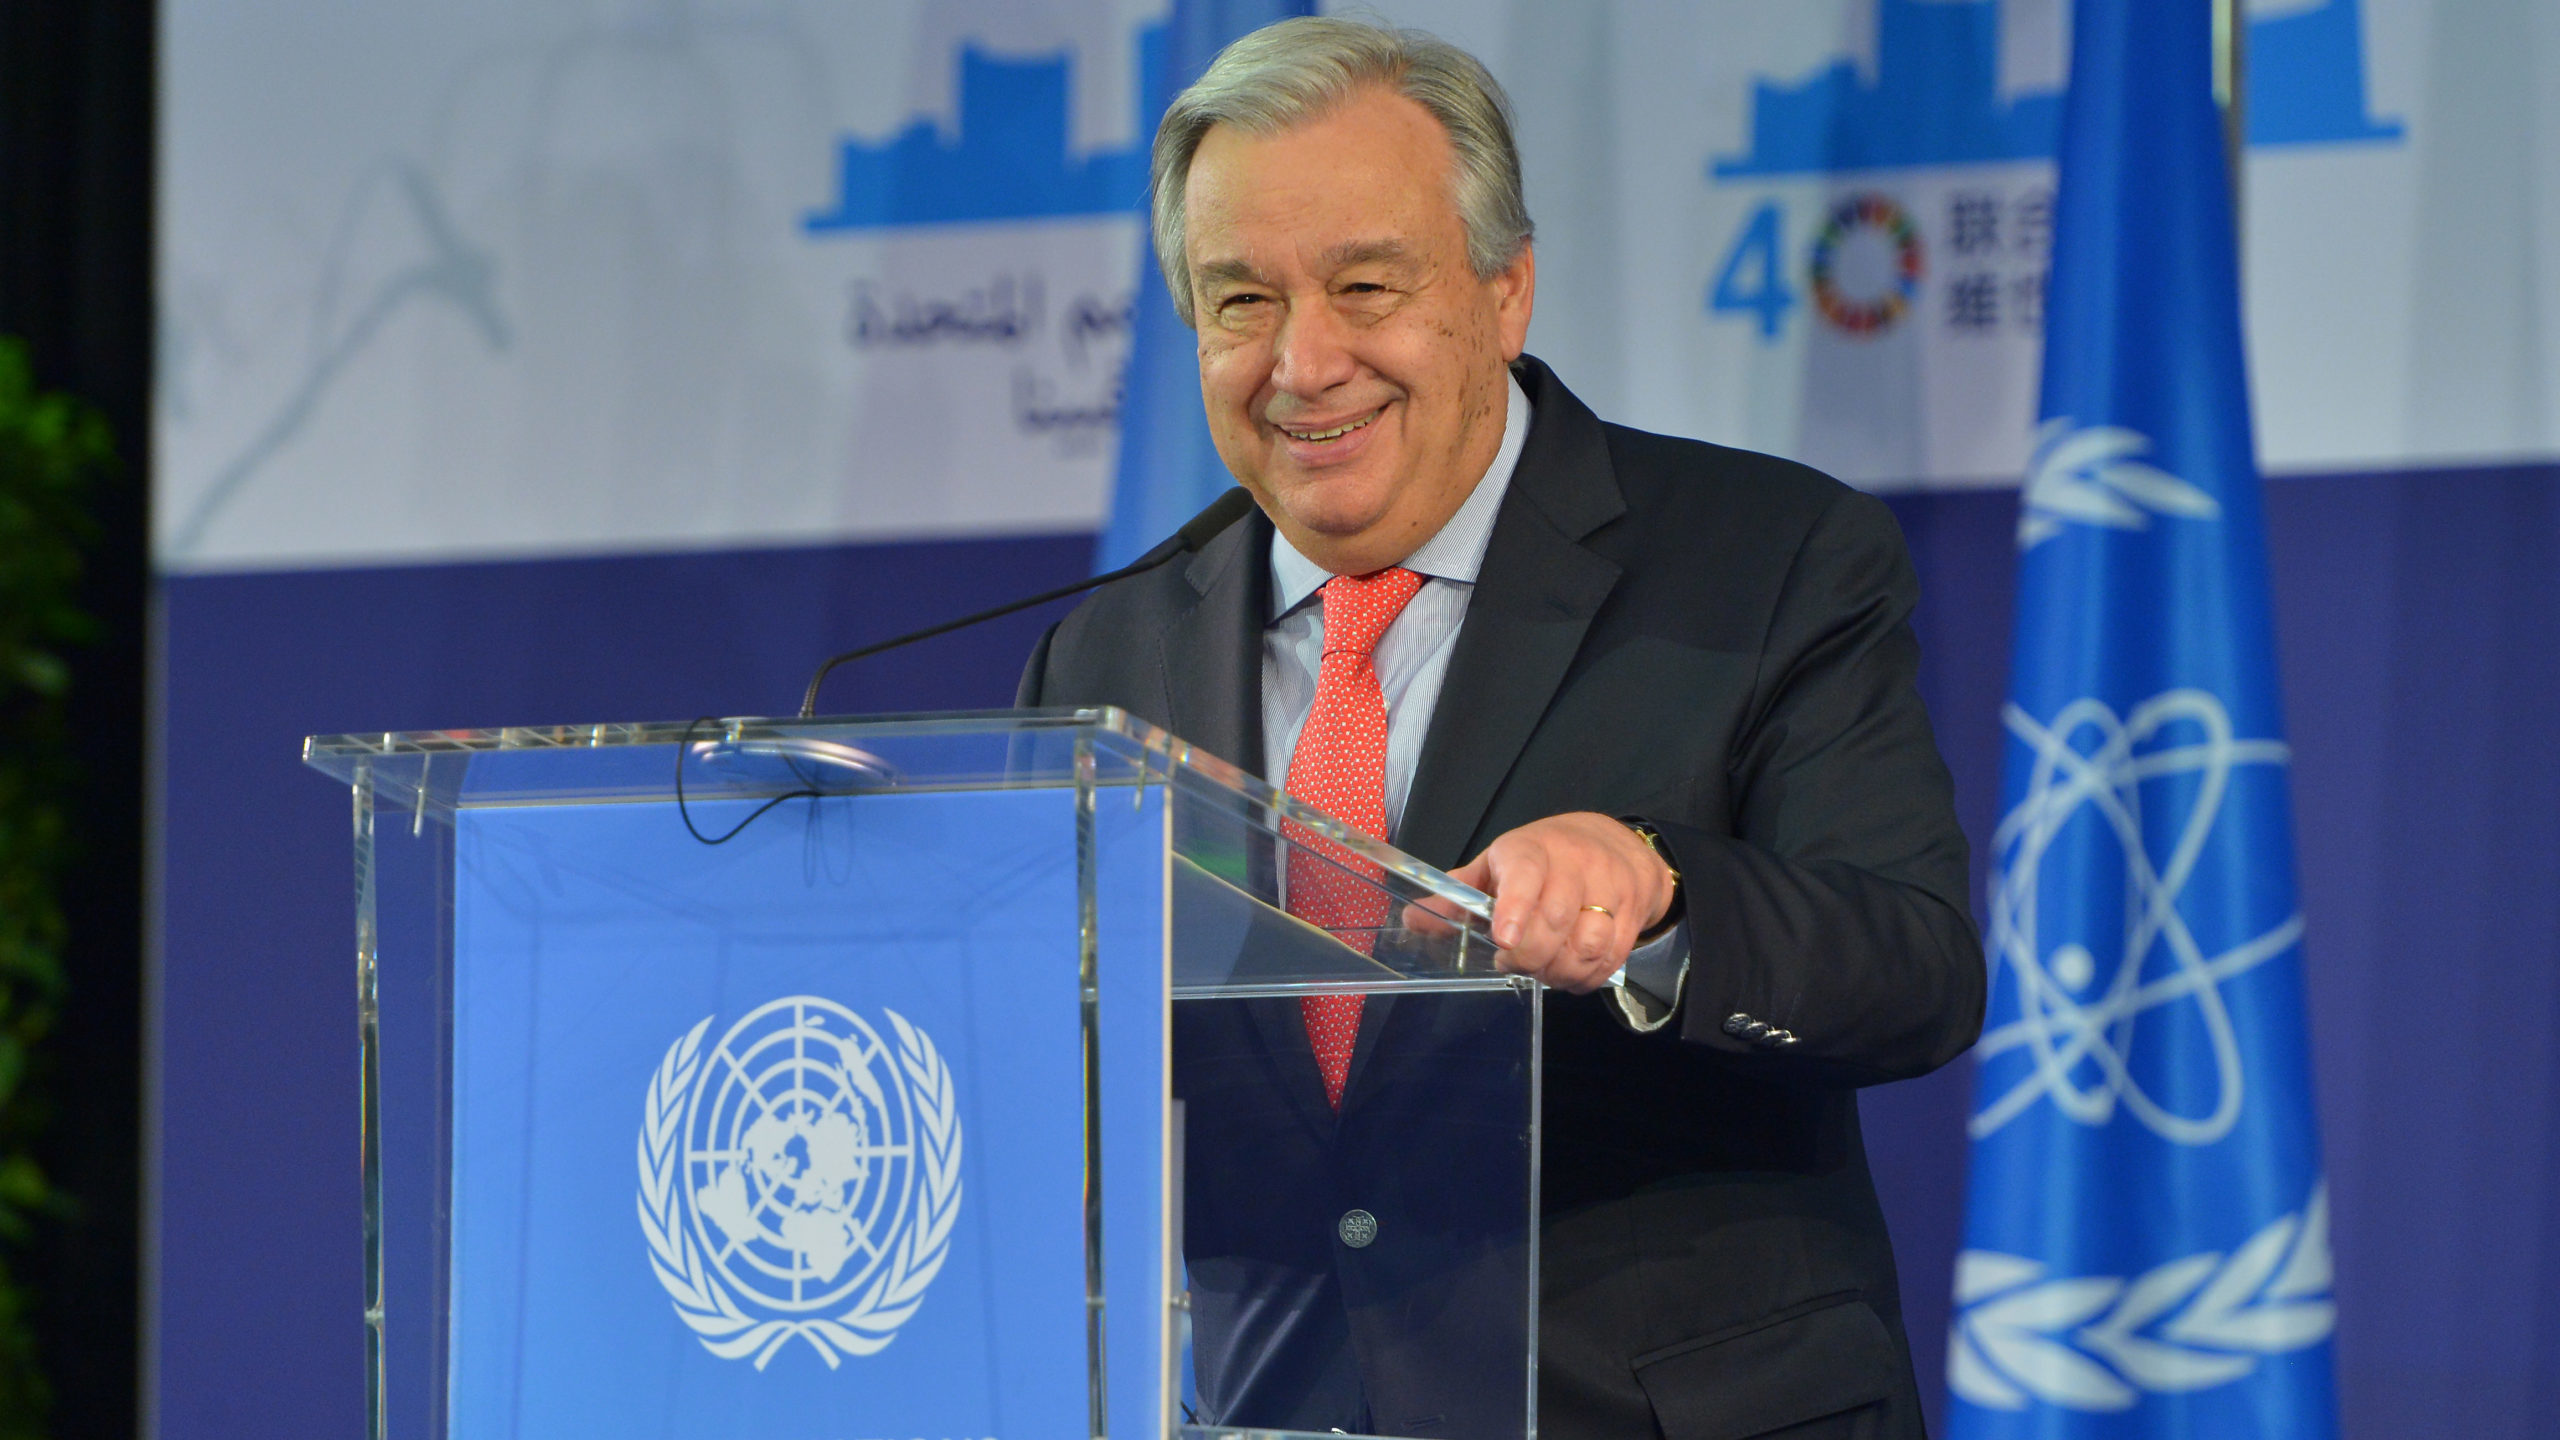 Sudan Conflict Could ‘Engulf the Whole Region and Beyond’: UN Chief